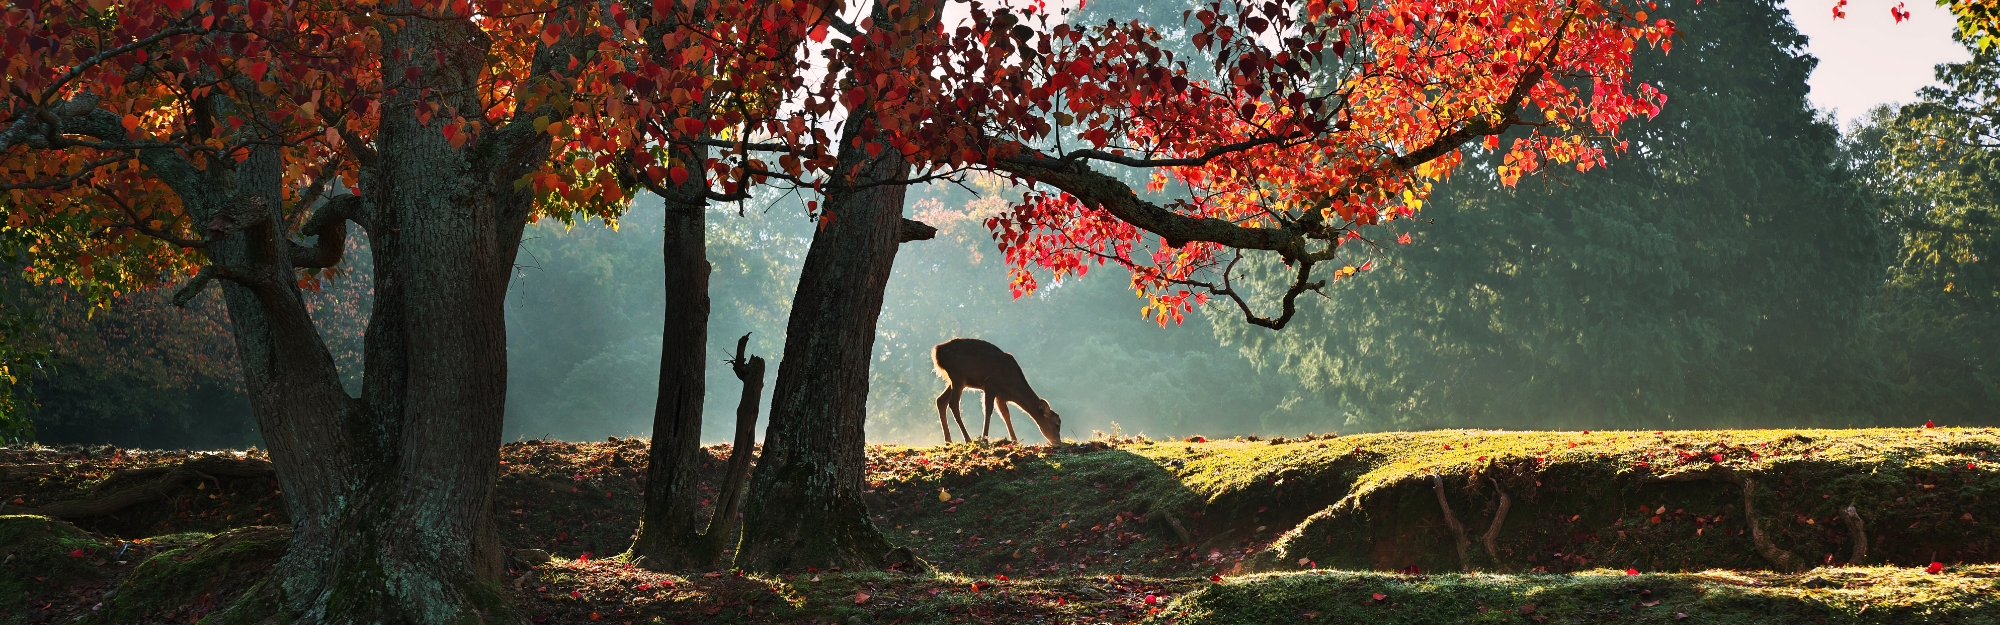 View of deer next to autumn leaves.